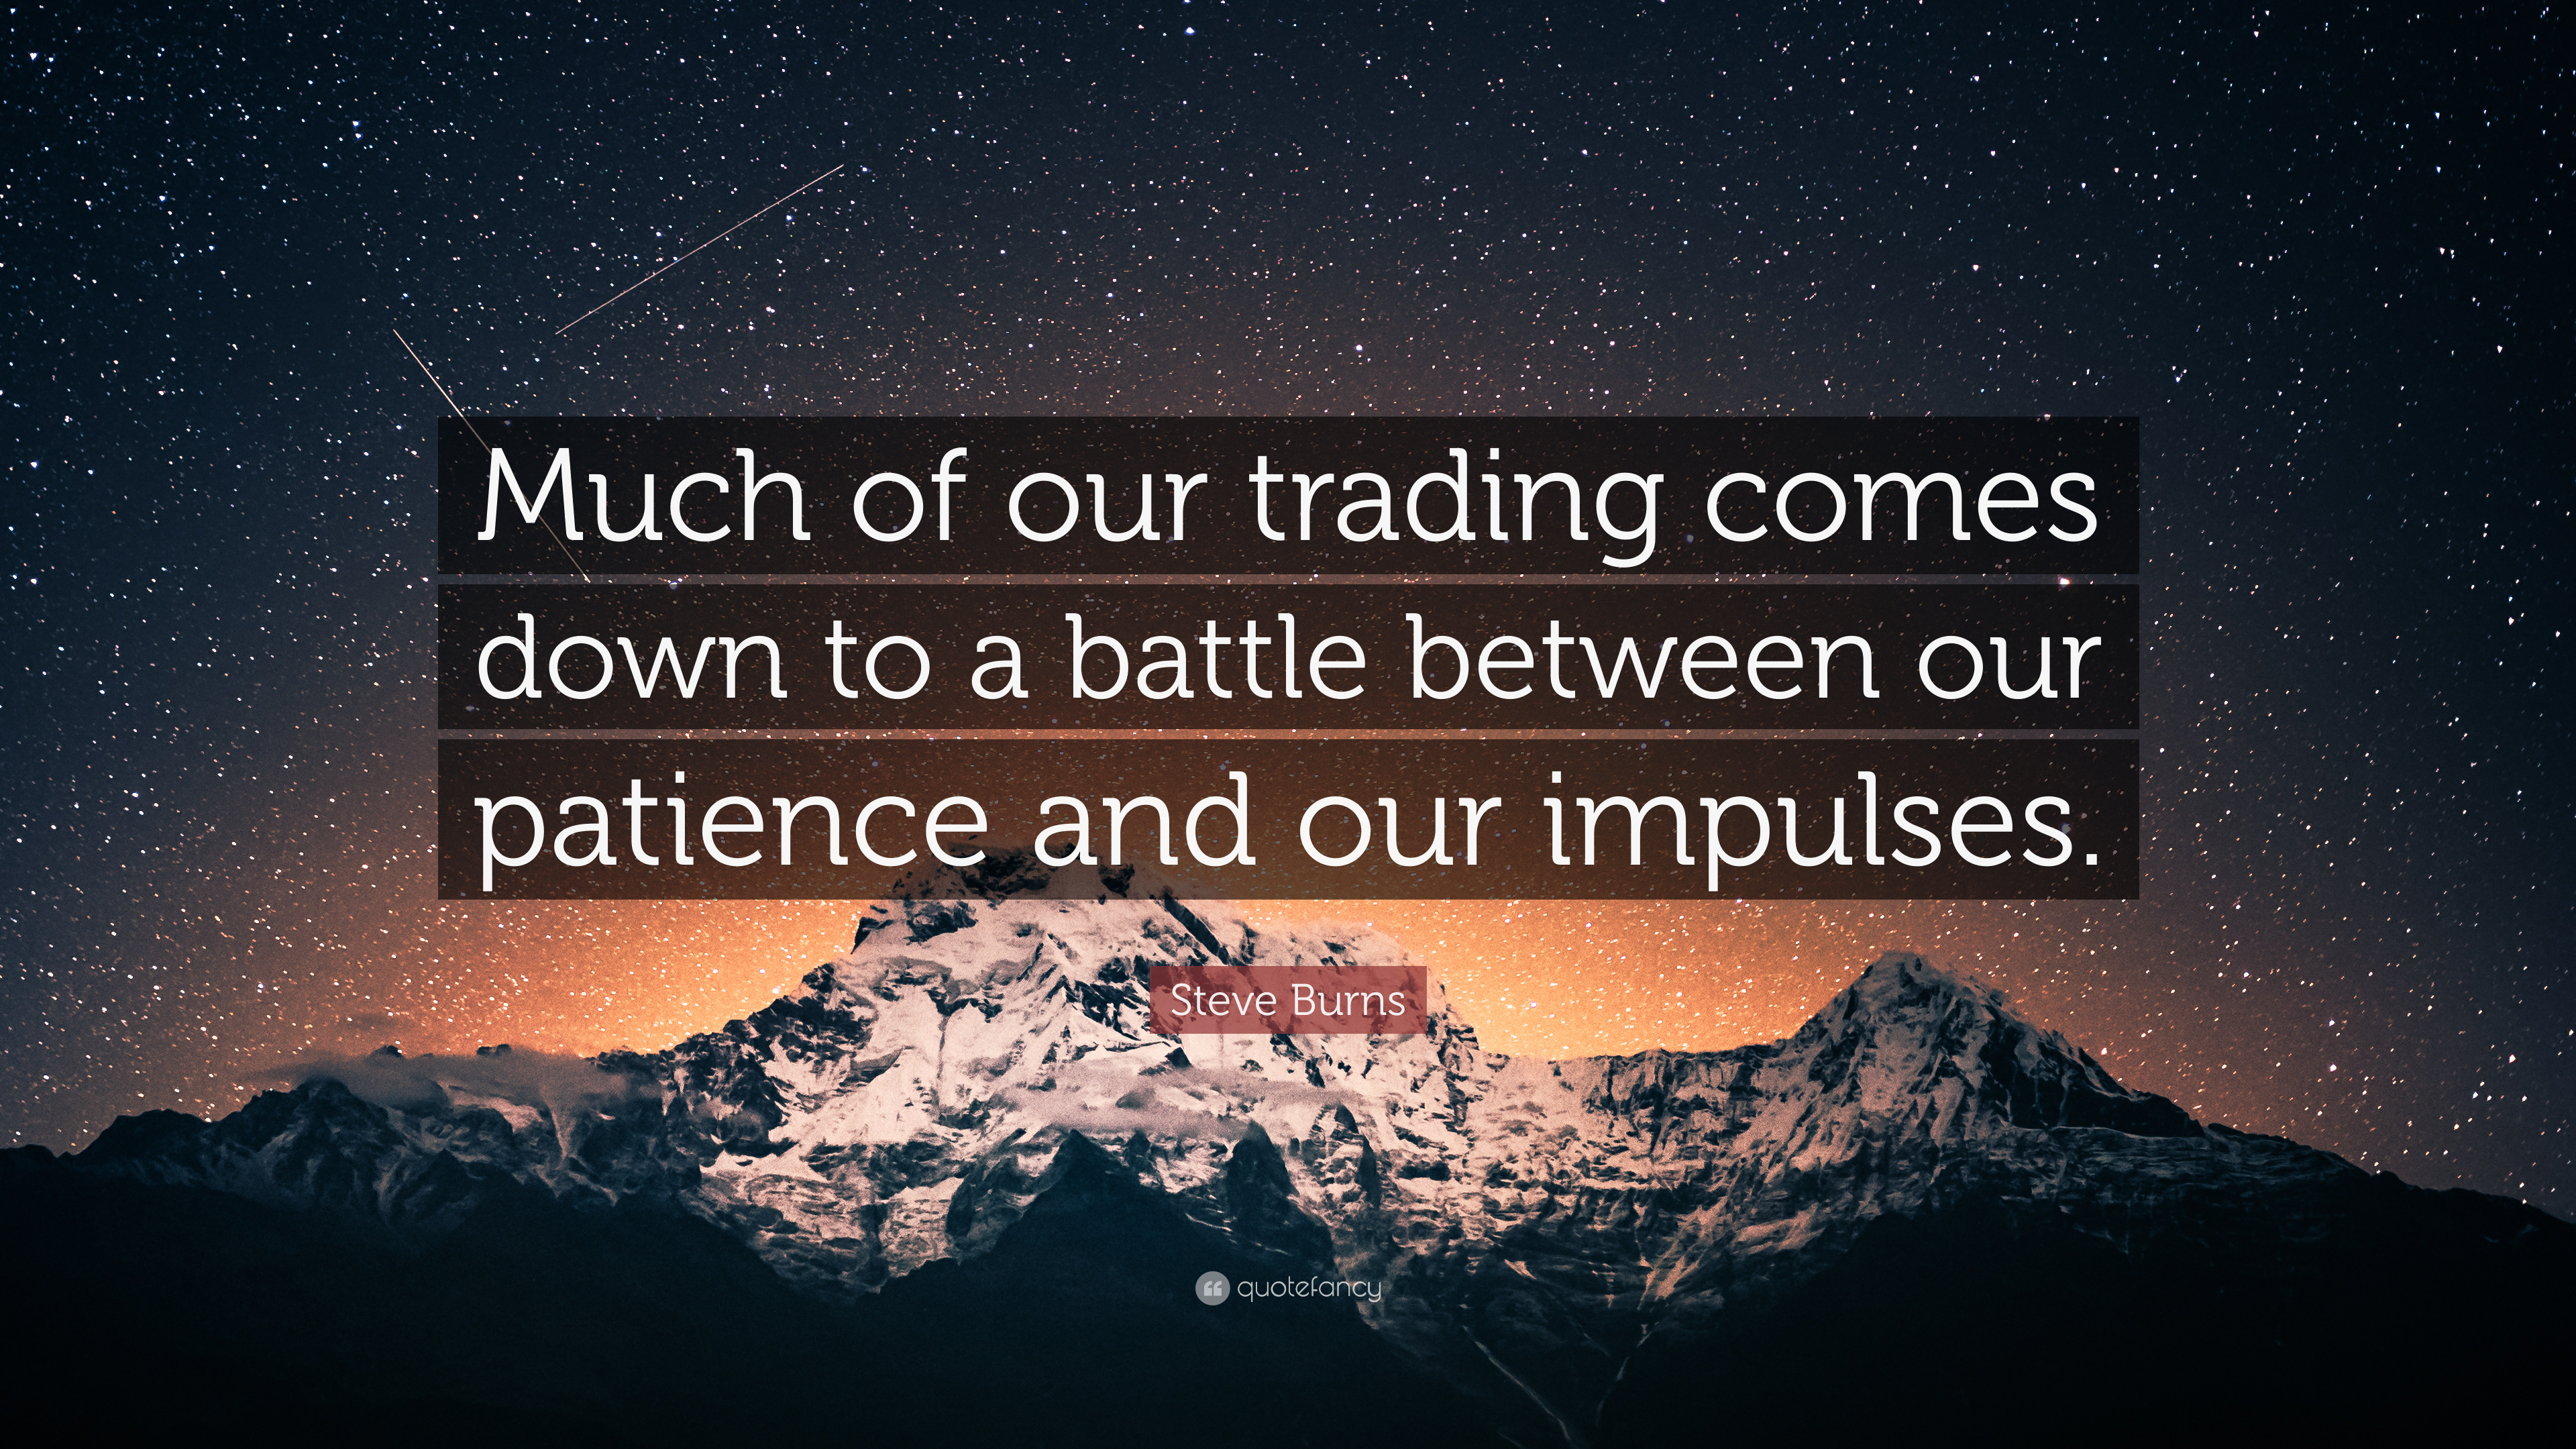 Steve Burns Quote: “Much of our trading comes down to a battle between our patience and